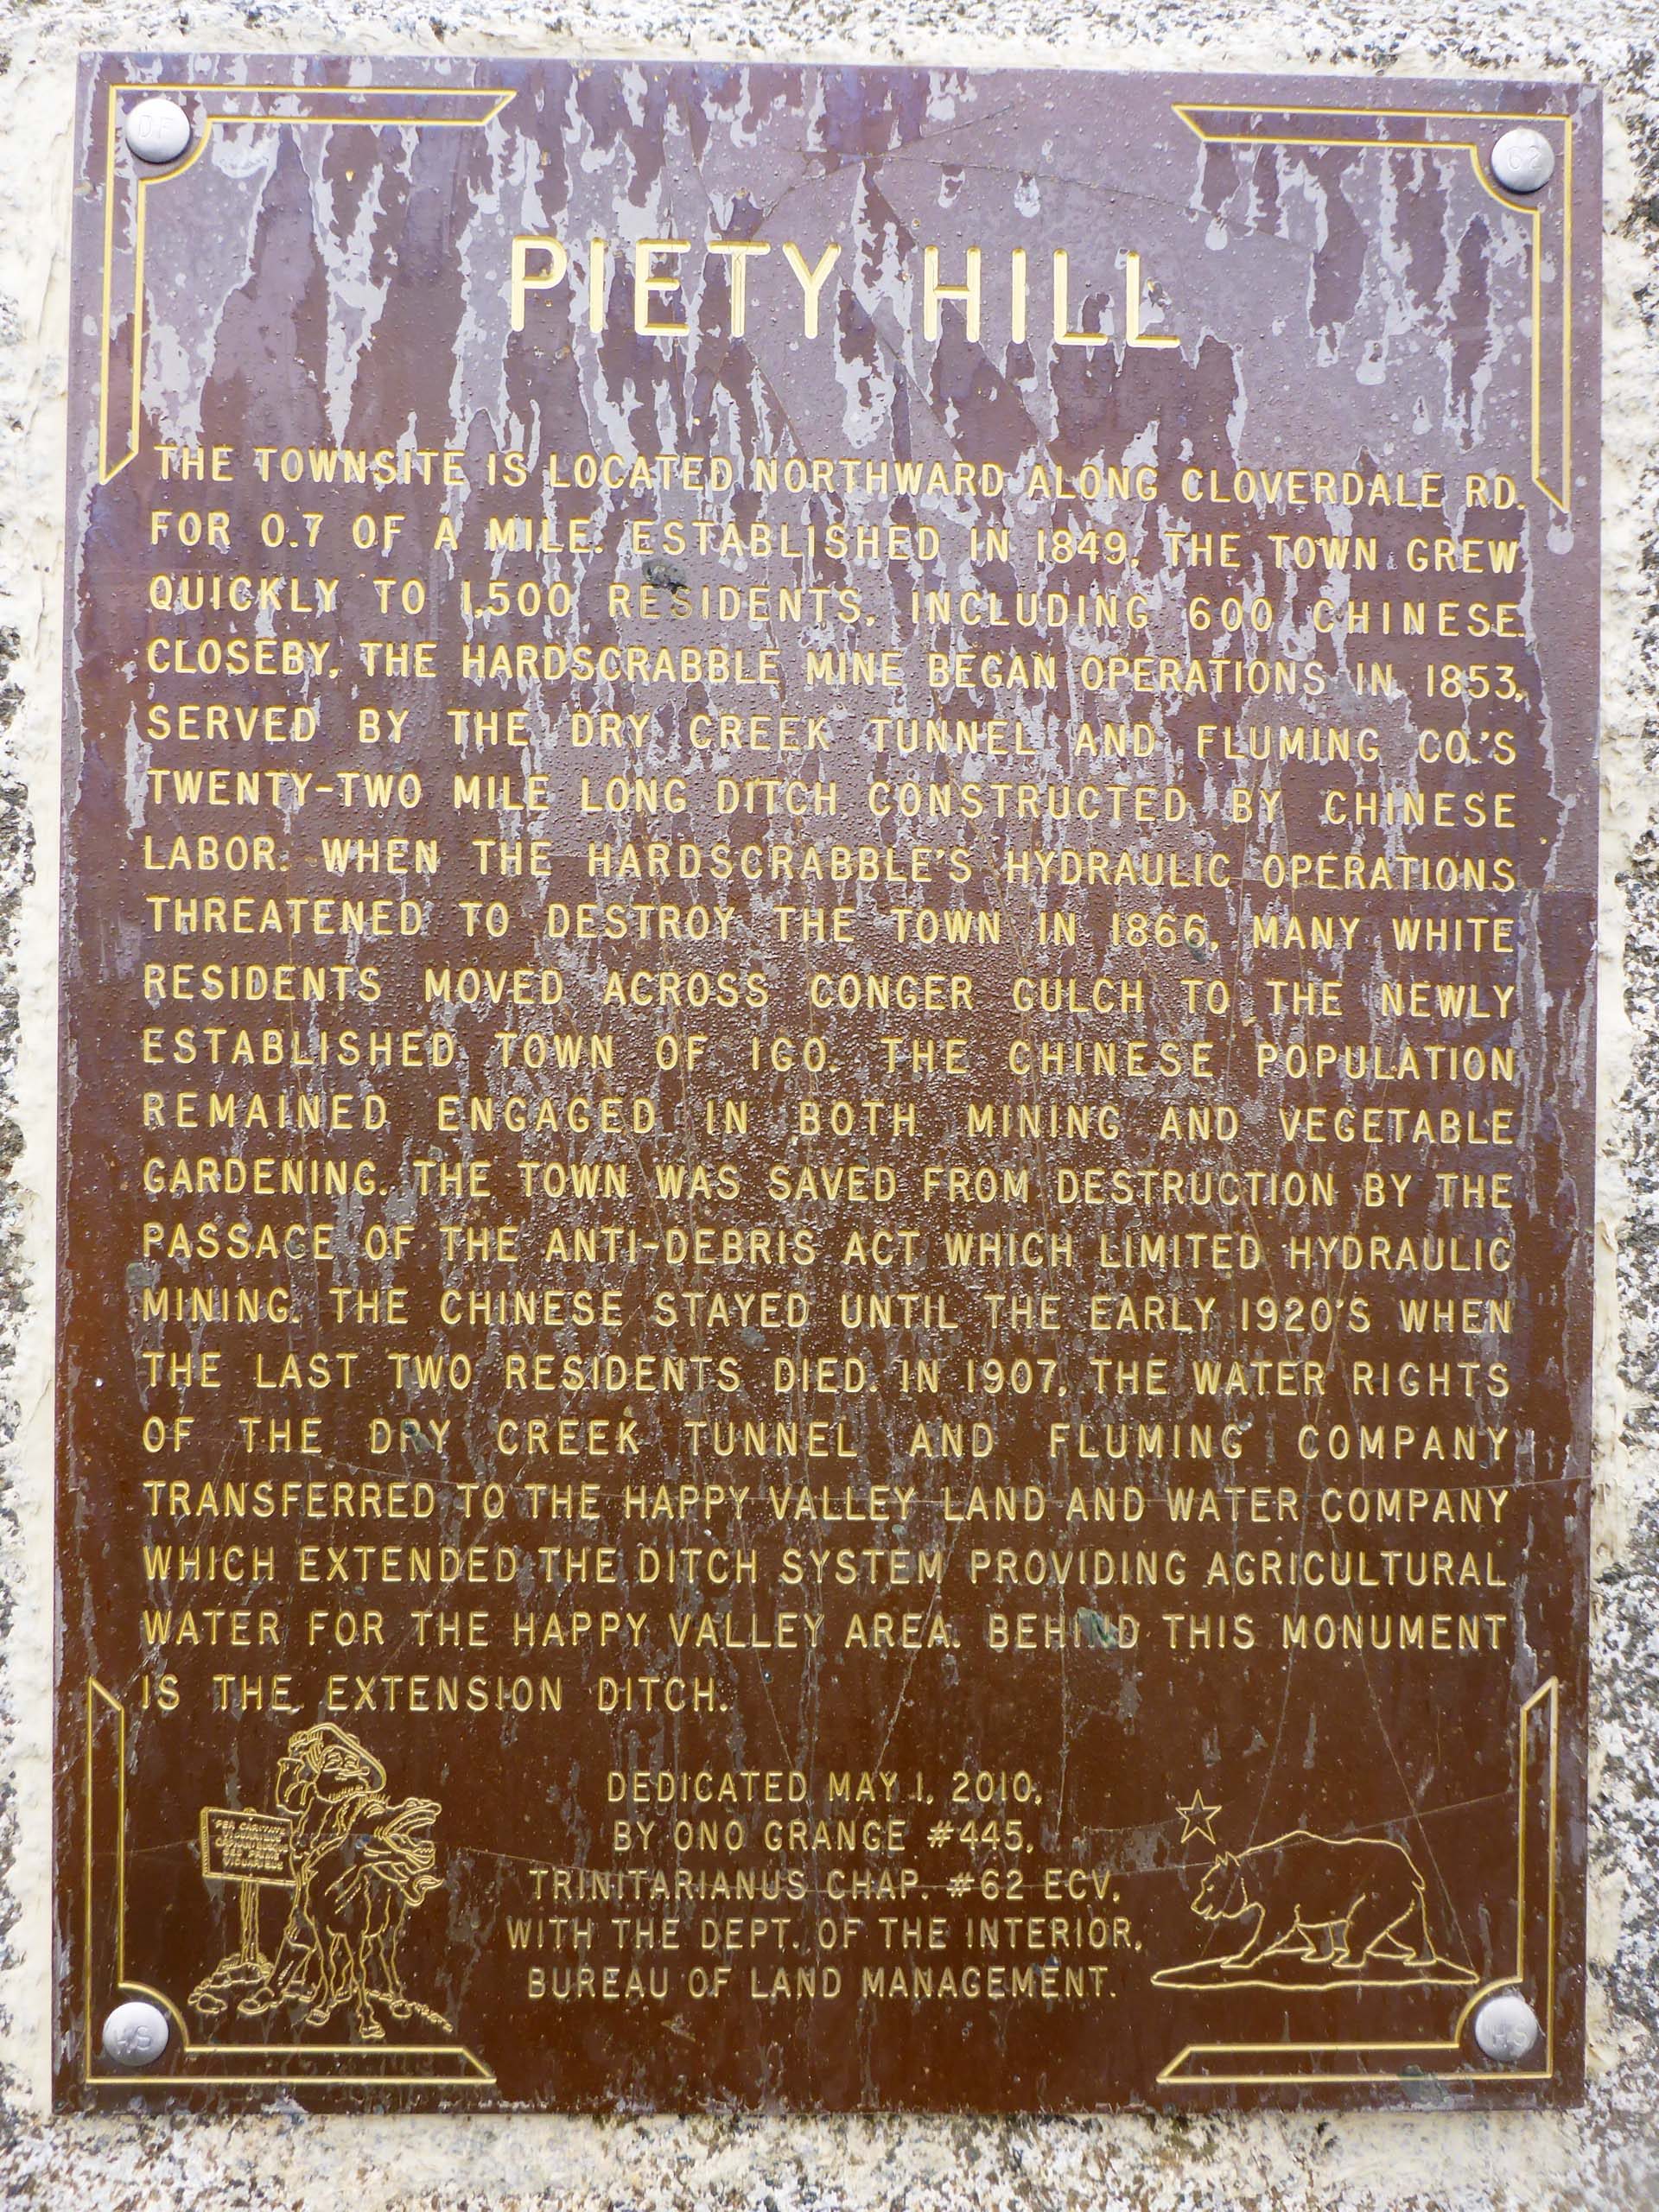 Piety Hill history plaque. D. Burk.